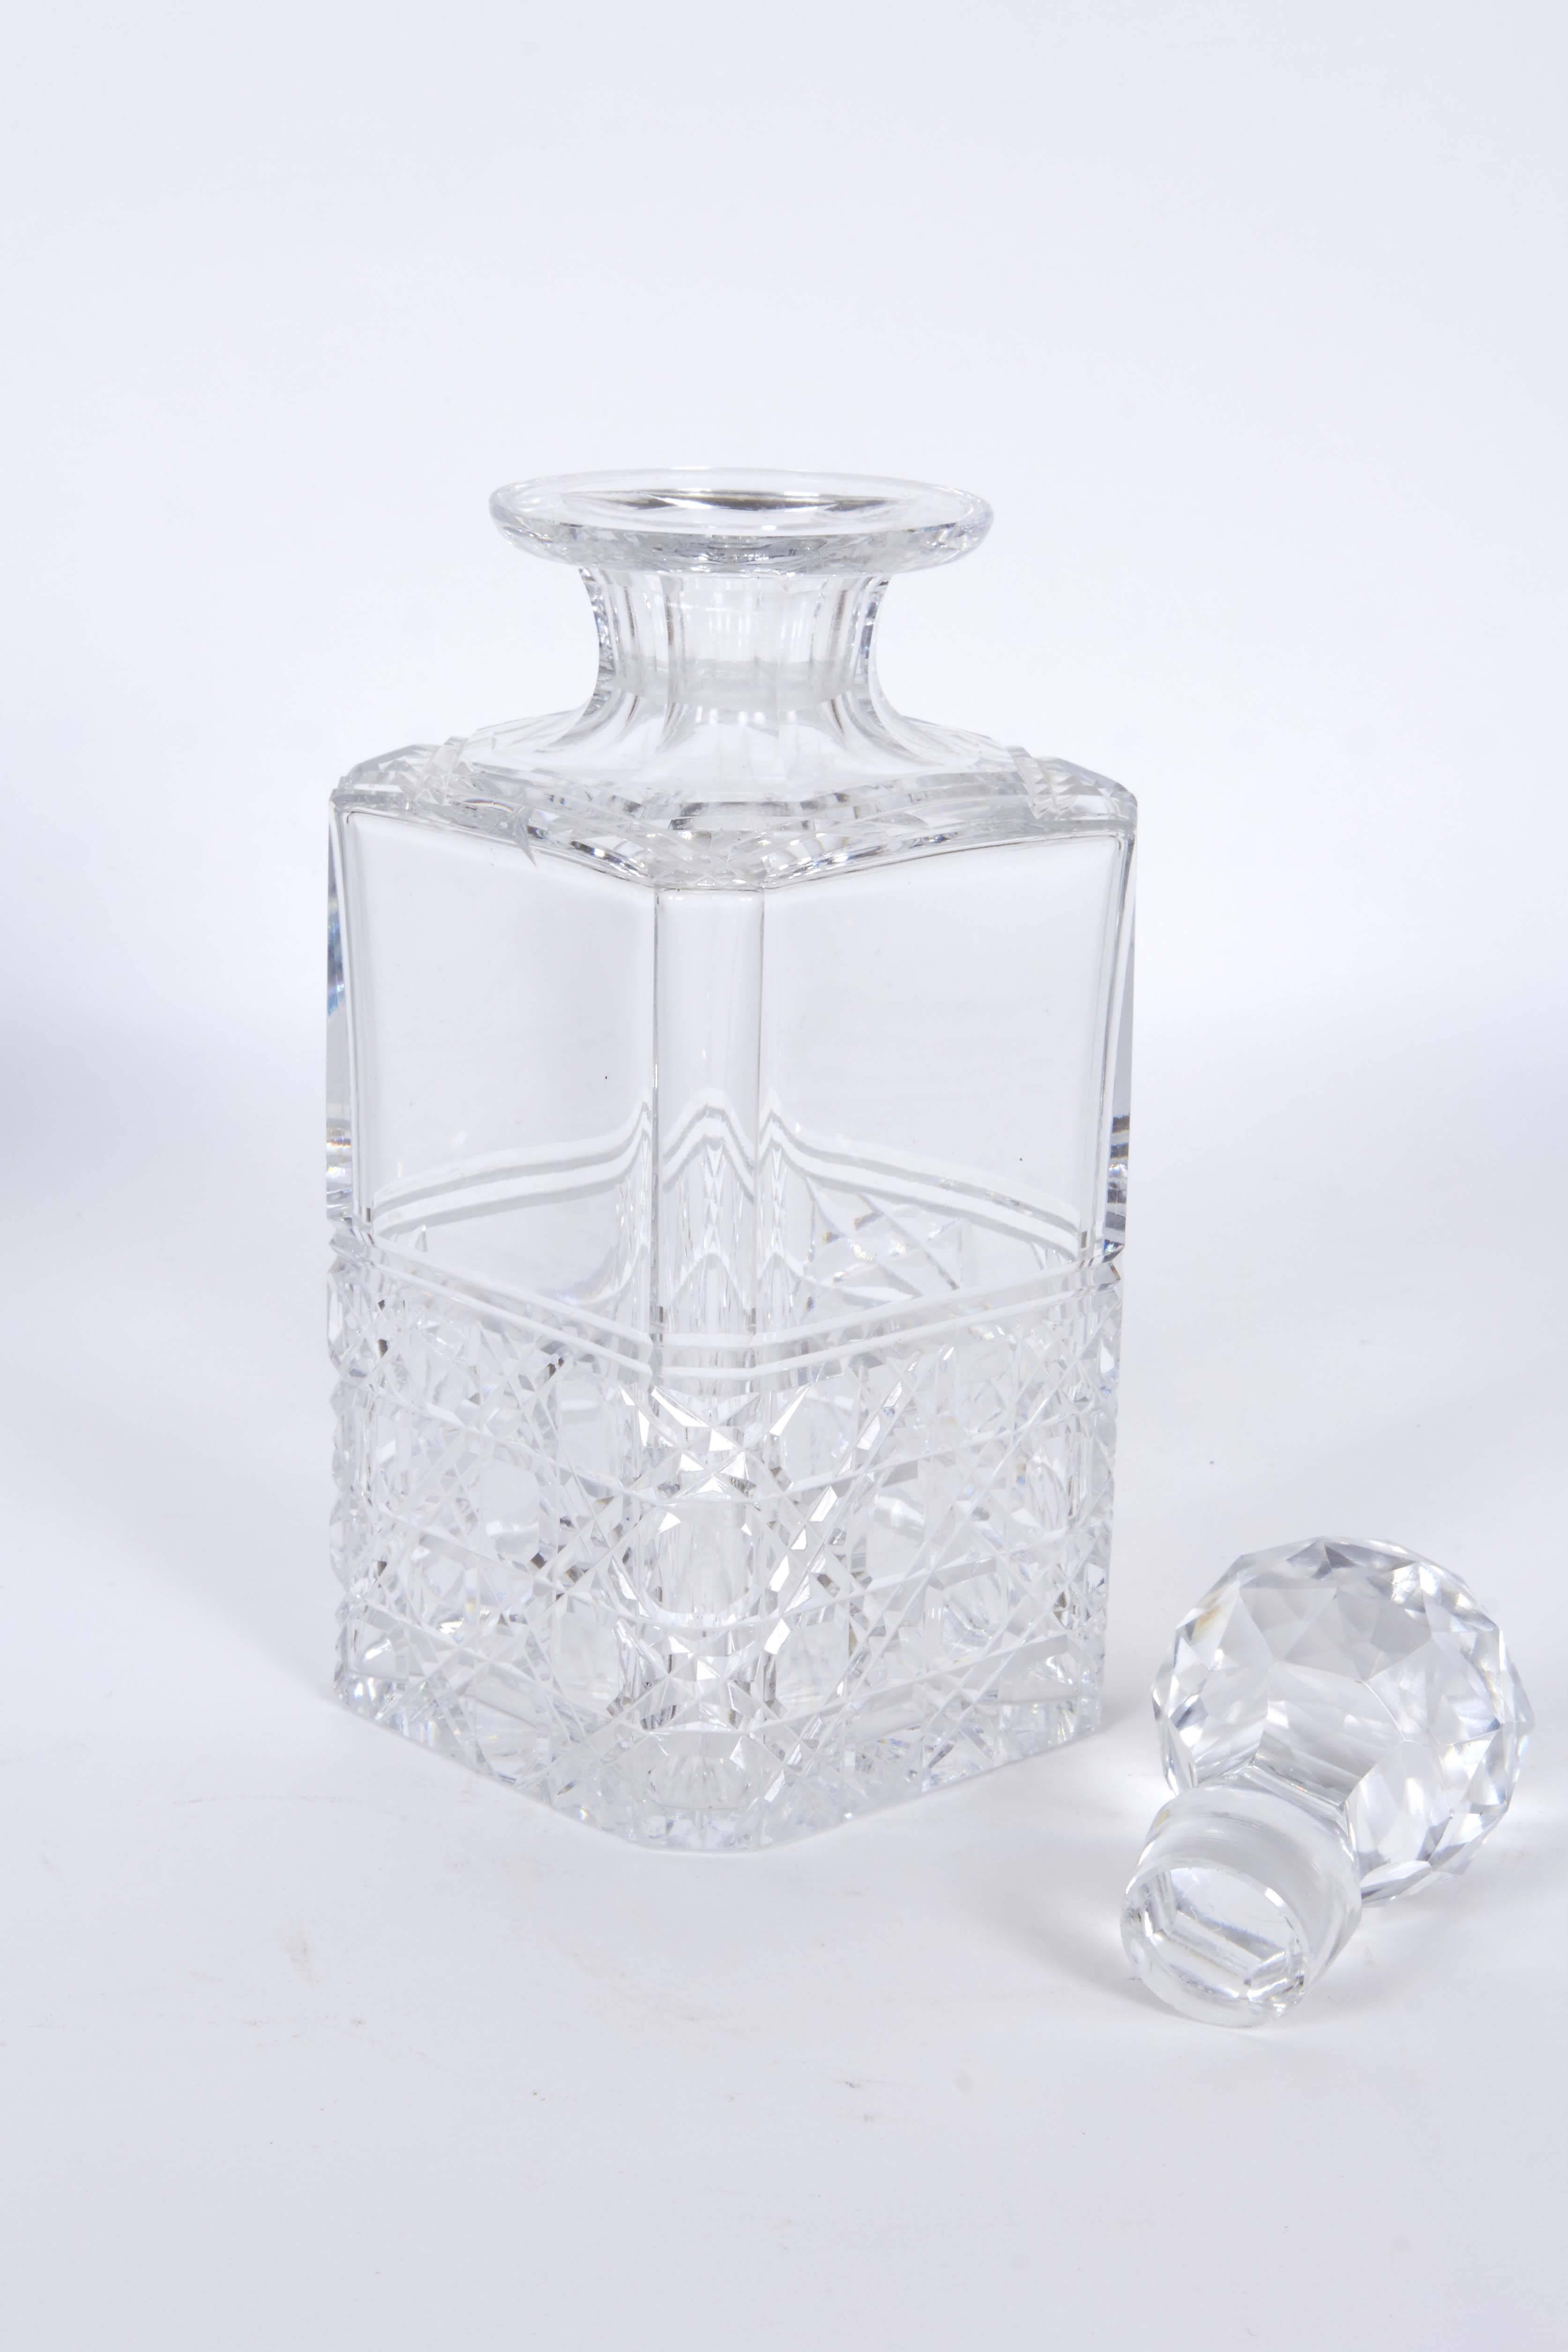 A set of three Edinburgh crystal decanters, produced within the early 20th century period, circa 1900s to 1930, each with original faceted stopper, on cut glass square bottle. Markings include [Made in Edinburgh Scotland] signed to the bottom